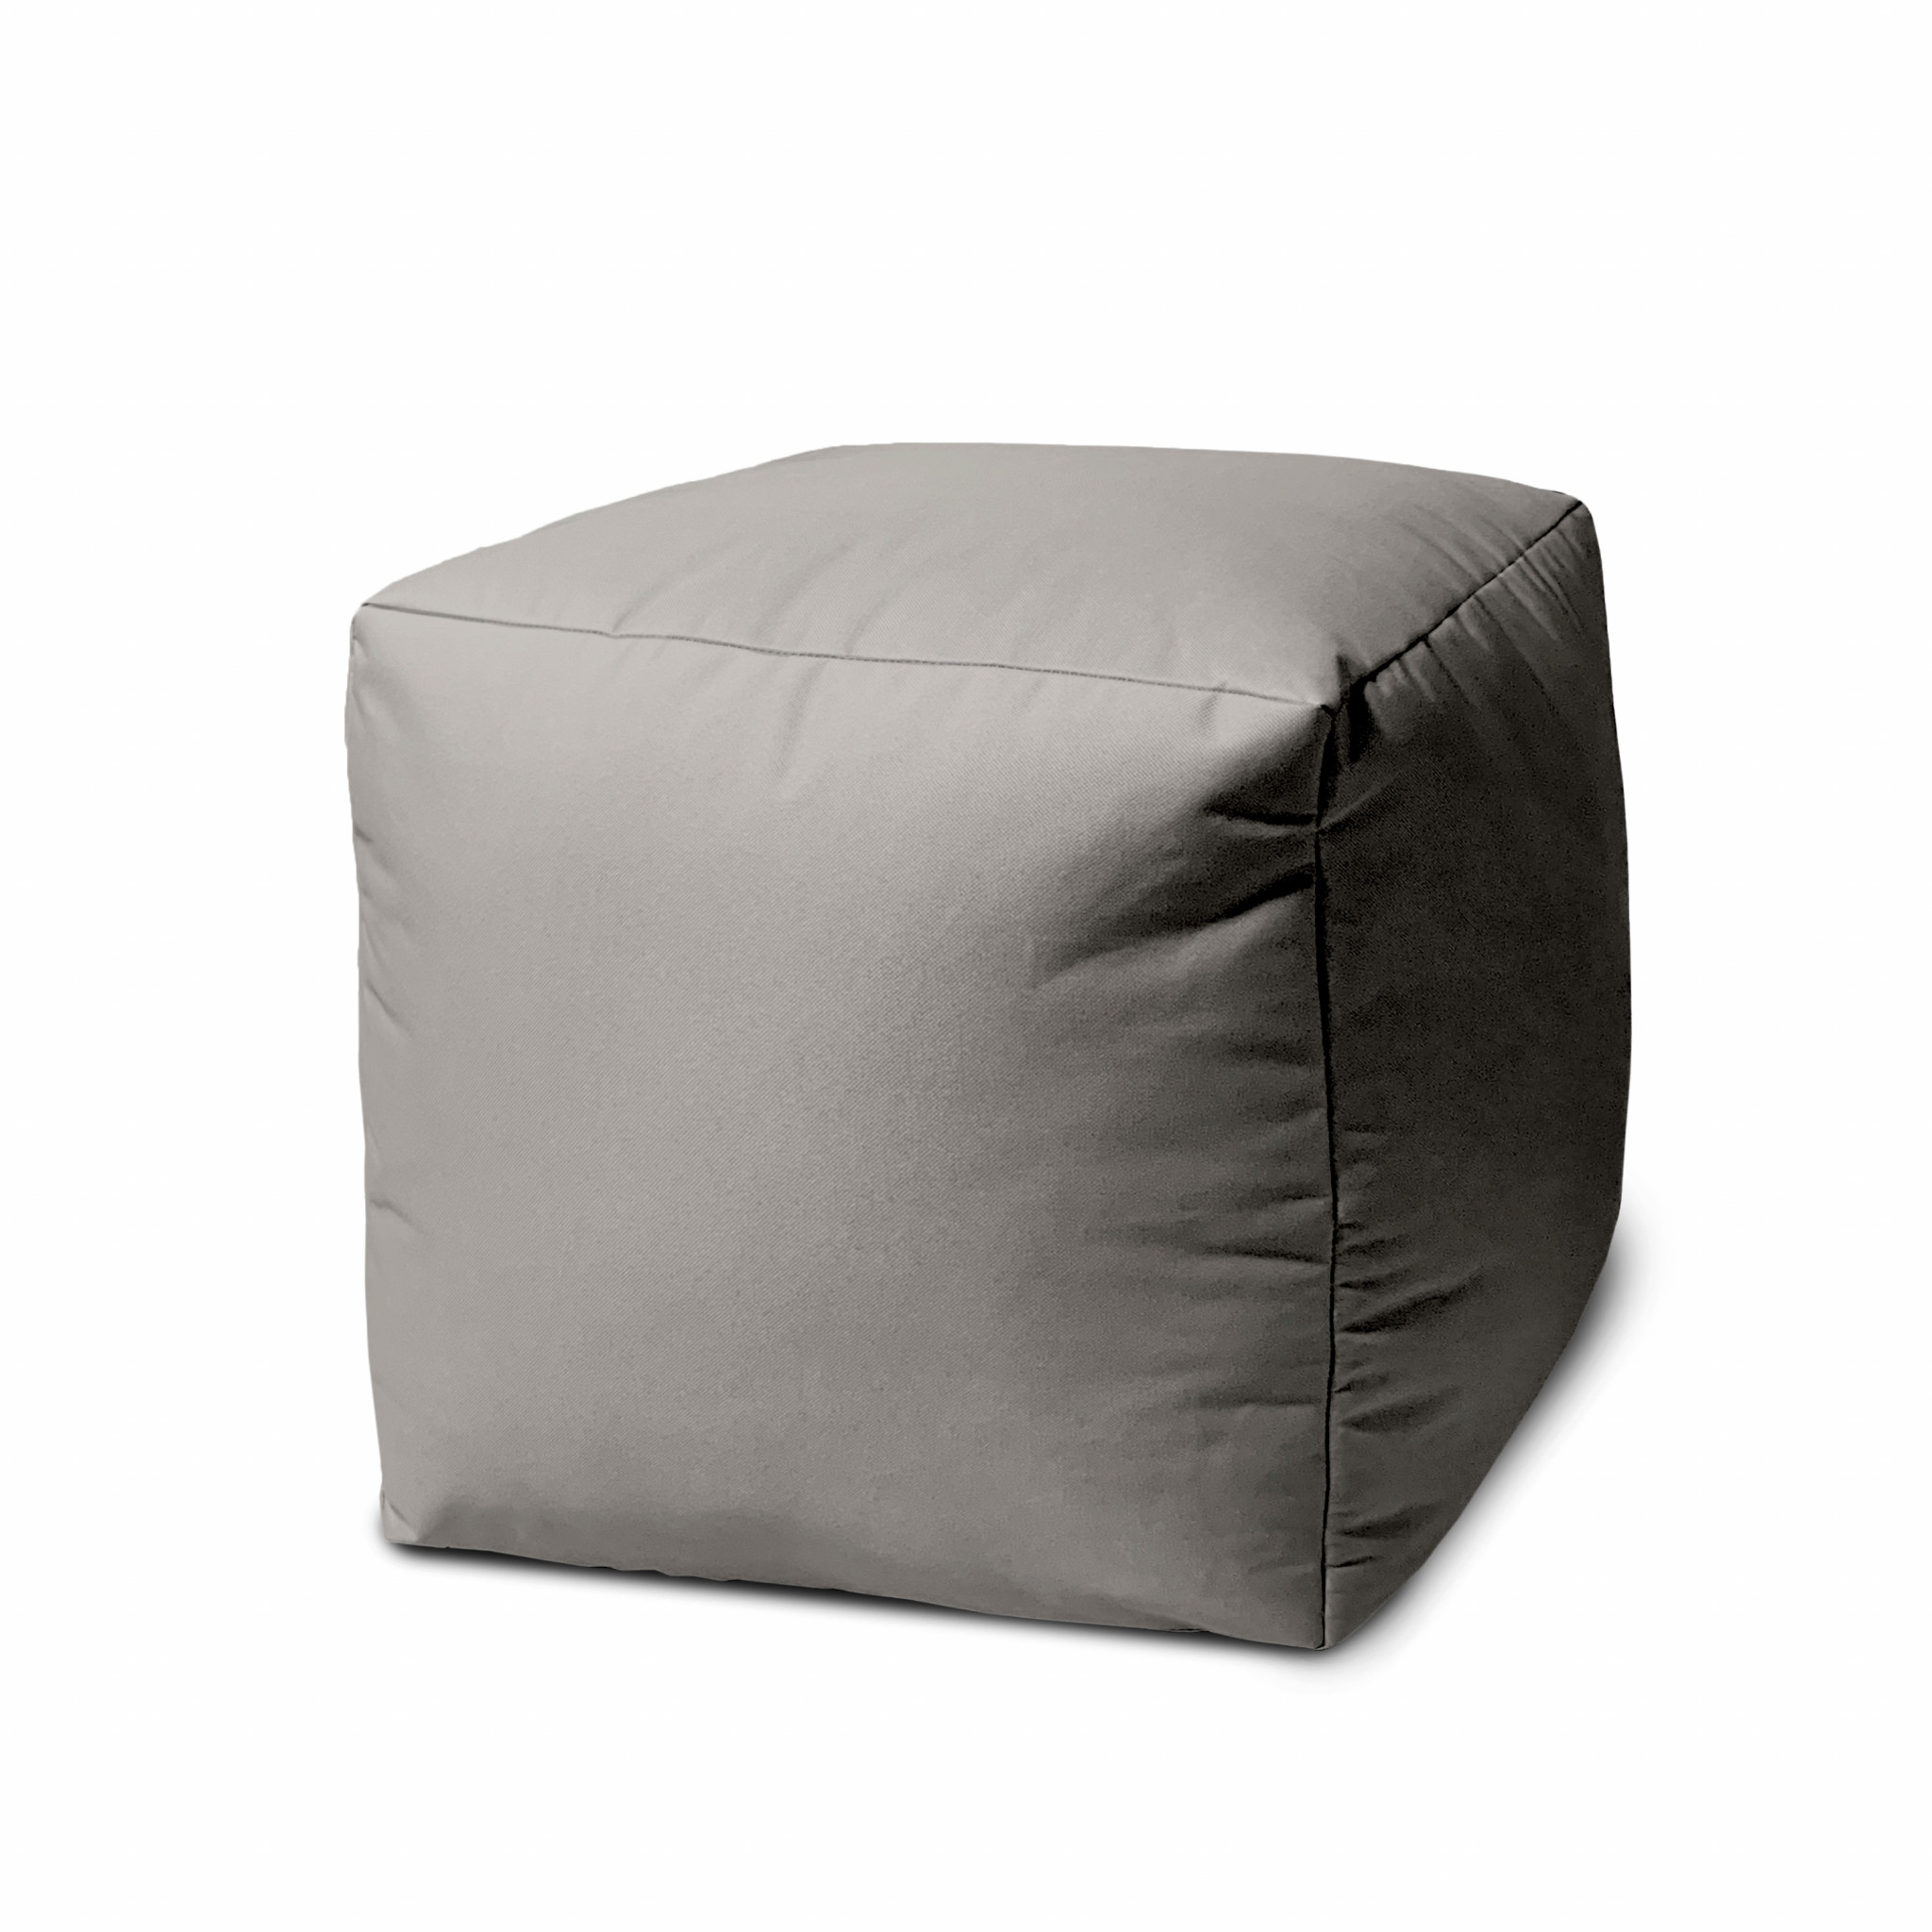 17" Cool Steely Silver Gray Solid Color Indoor Outdoor Pouf Ottoman-474166-1